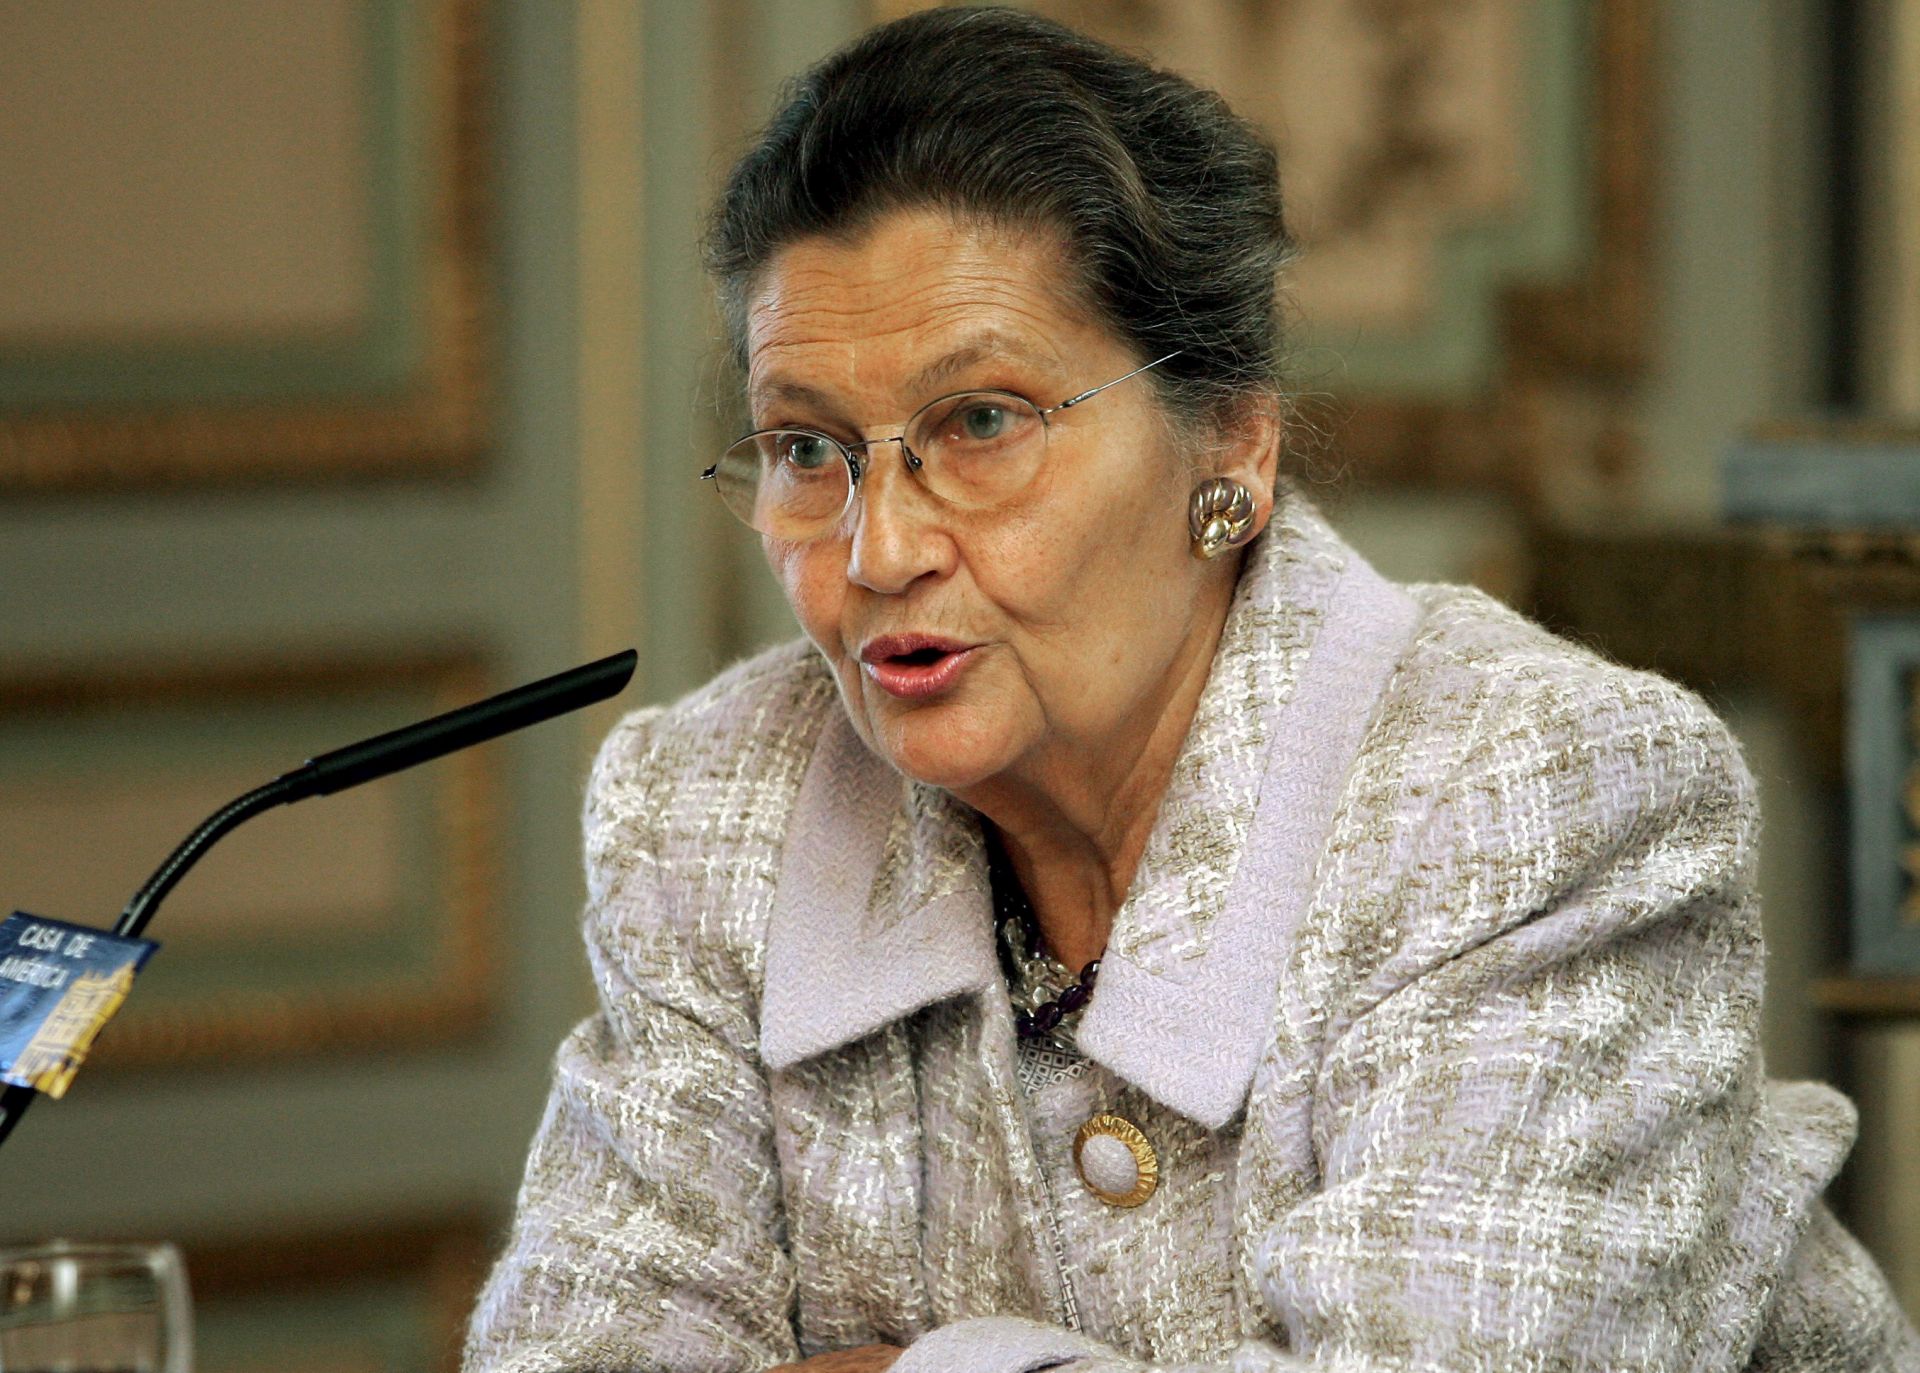 epa06057408 (FILE) French politician, European legislator and Holocaust survivor Simone Veil speaks during a press conference at the House of America in Madrid, Spain, 19 October 2005  (reissued on 30 June 2017). Simone Veil has died on 30 June 2017 at her home in Paris, her son Jean Veil announced the same day. She was 89.  EPA/FERNANDO ALVARADO